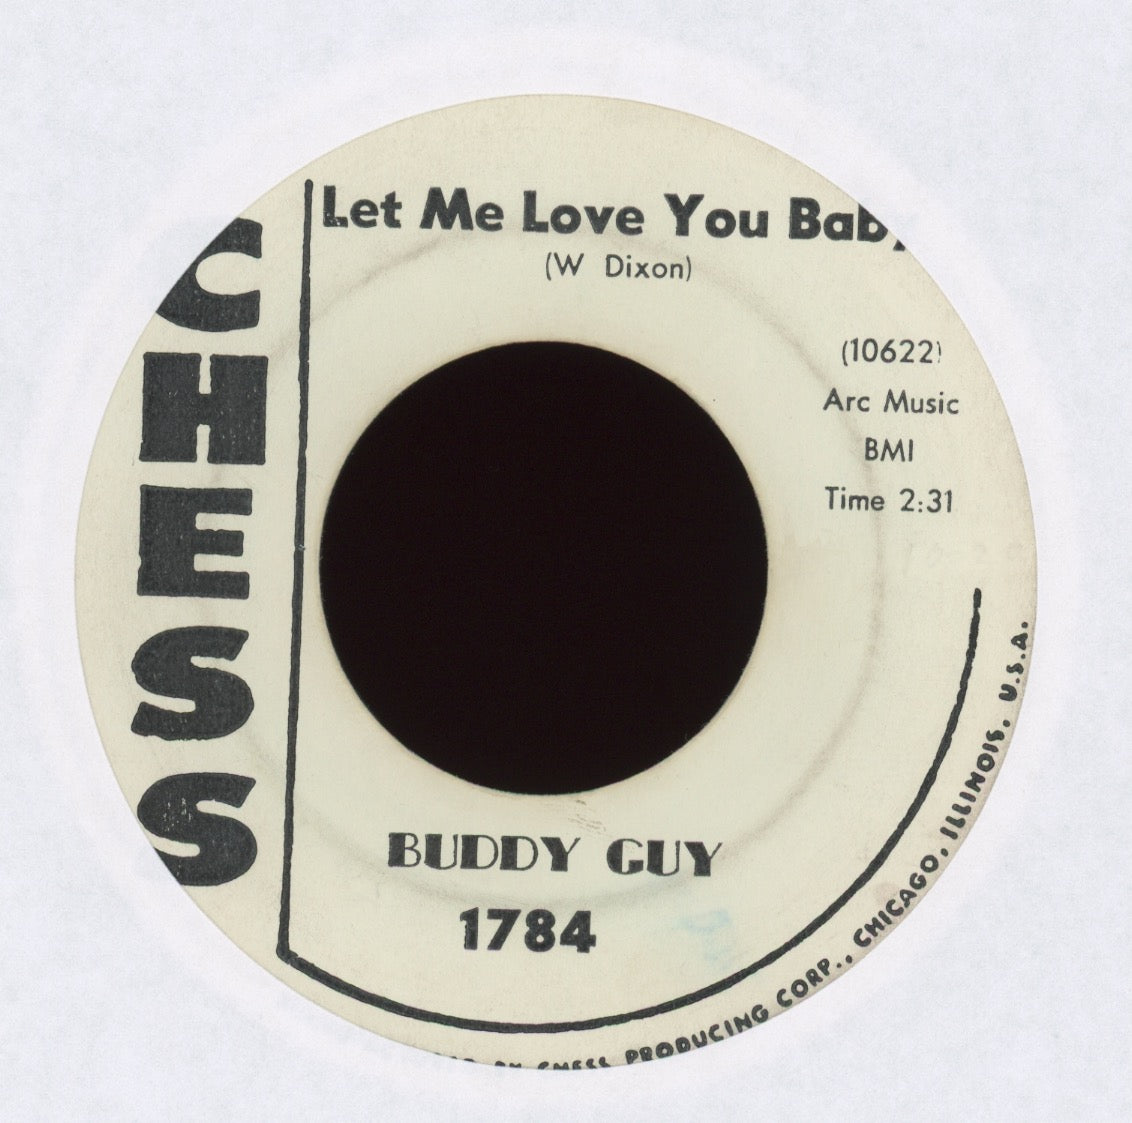 Buddy Guy - Let Me Love You Baby on Chess Promo